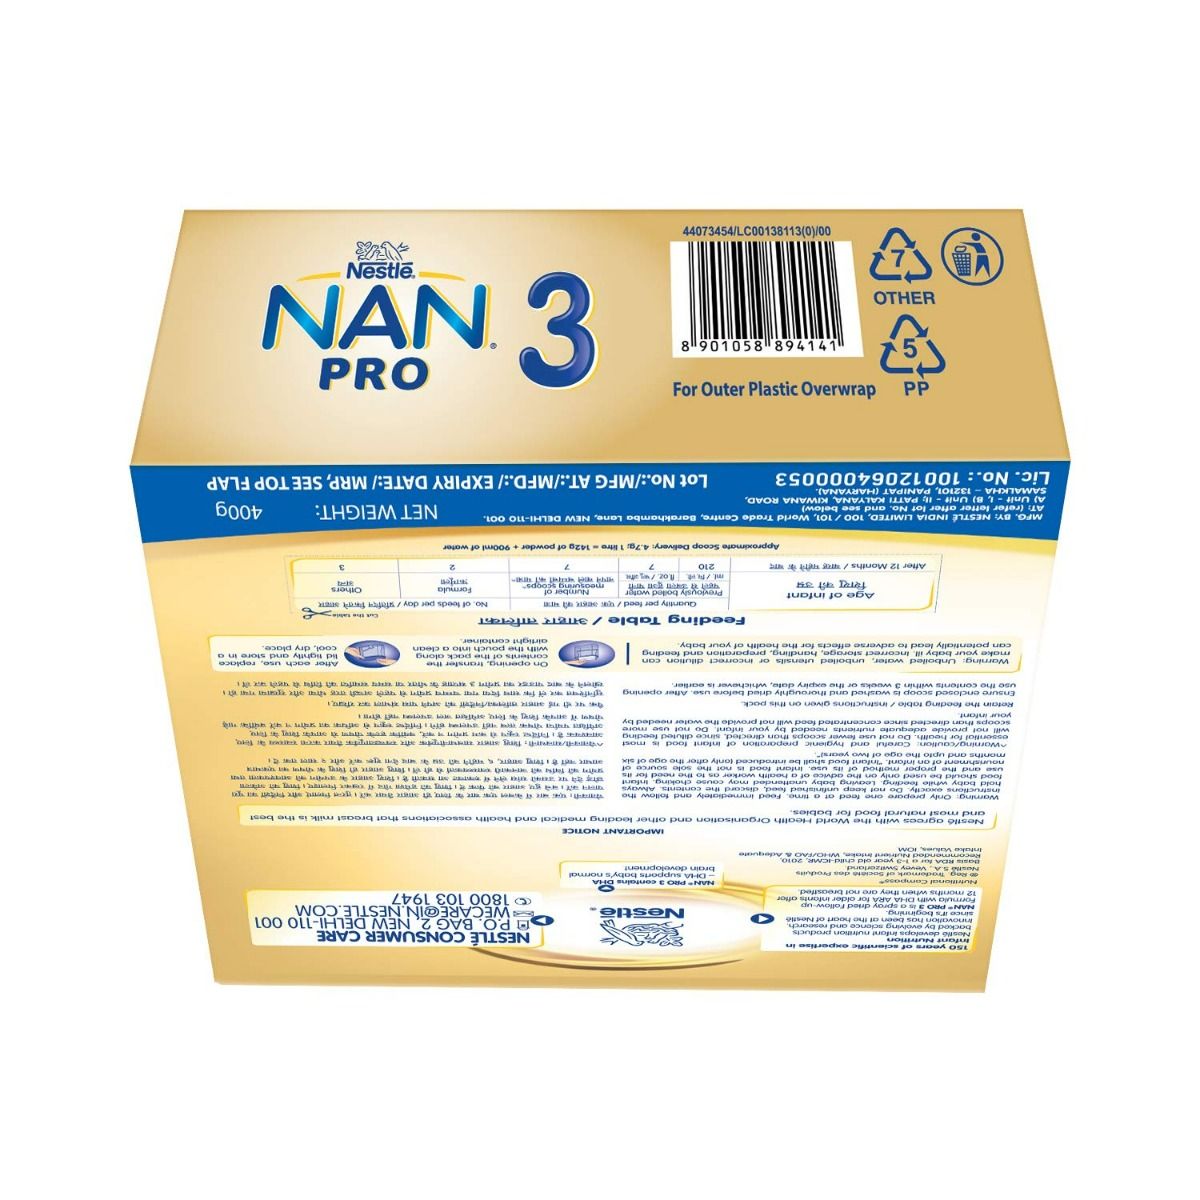 Nestle Nan Pro Follow-Up Formula, Stage 3, After 12 Months, 400 gm Refill Pack, Pack of 1 